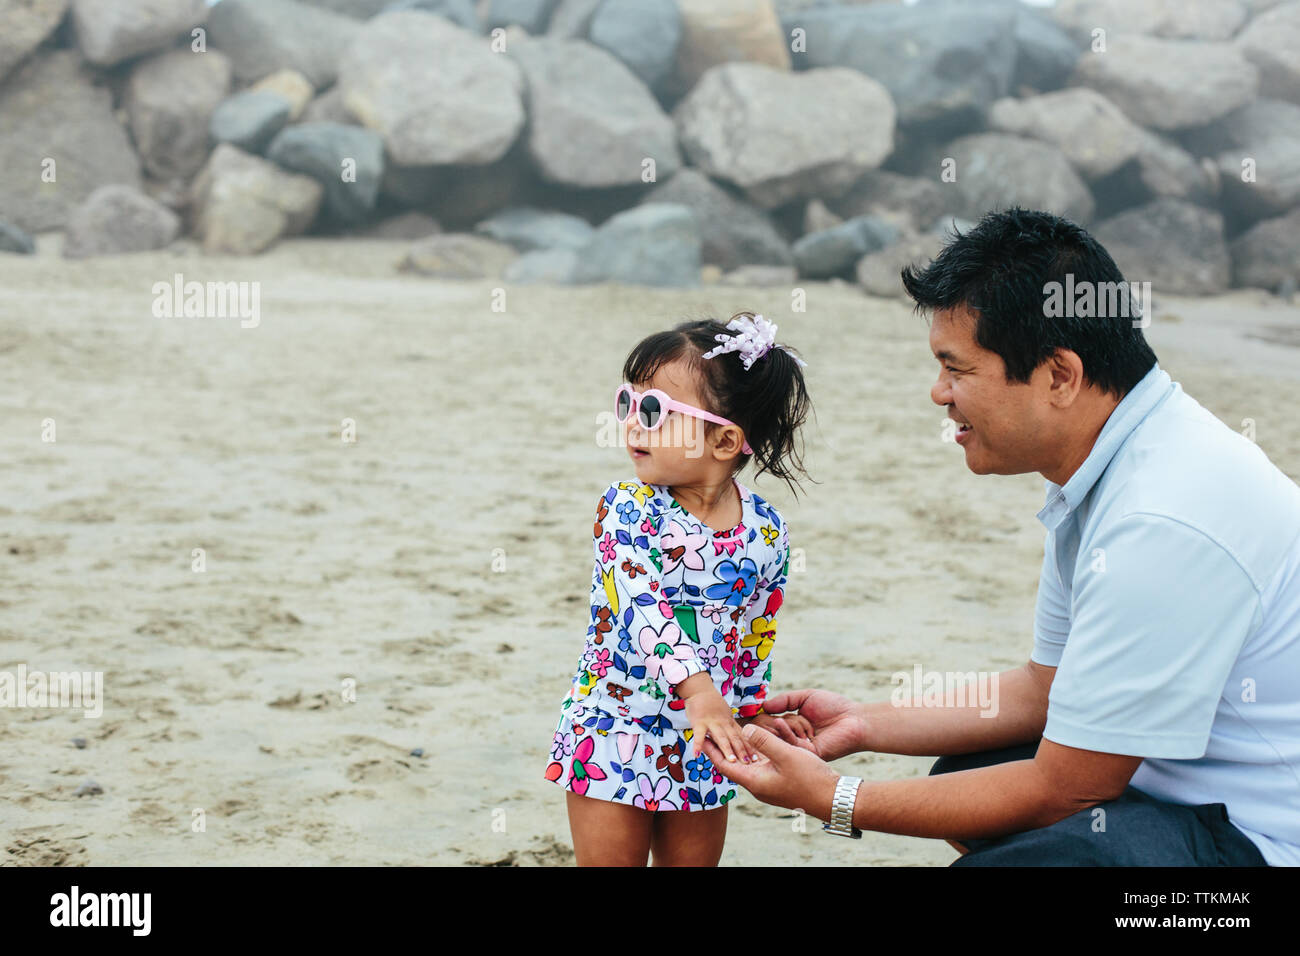 Father Smiles At Daughter While Holding Hands At Beach Stock Photo